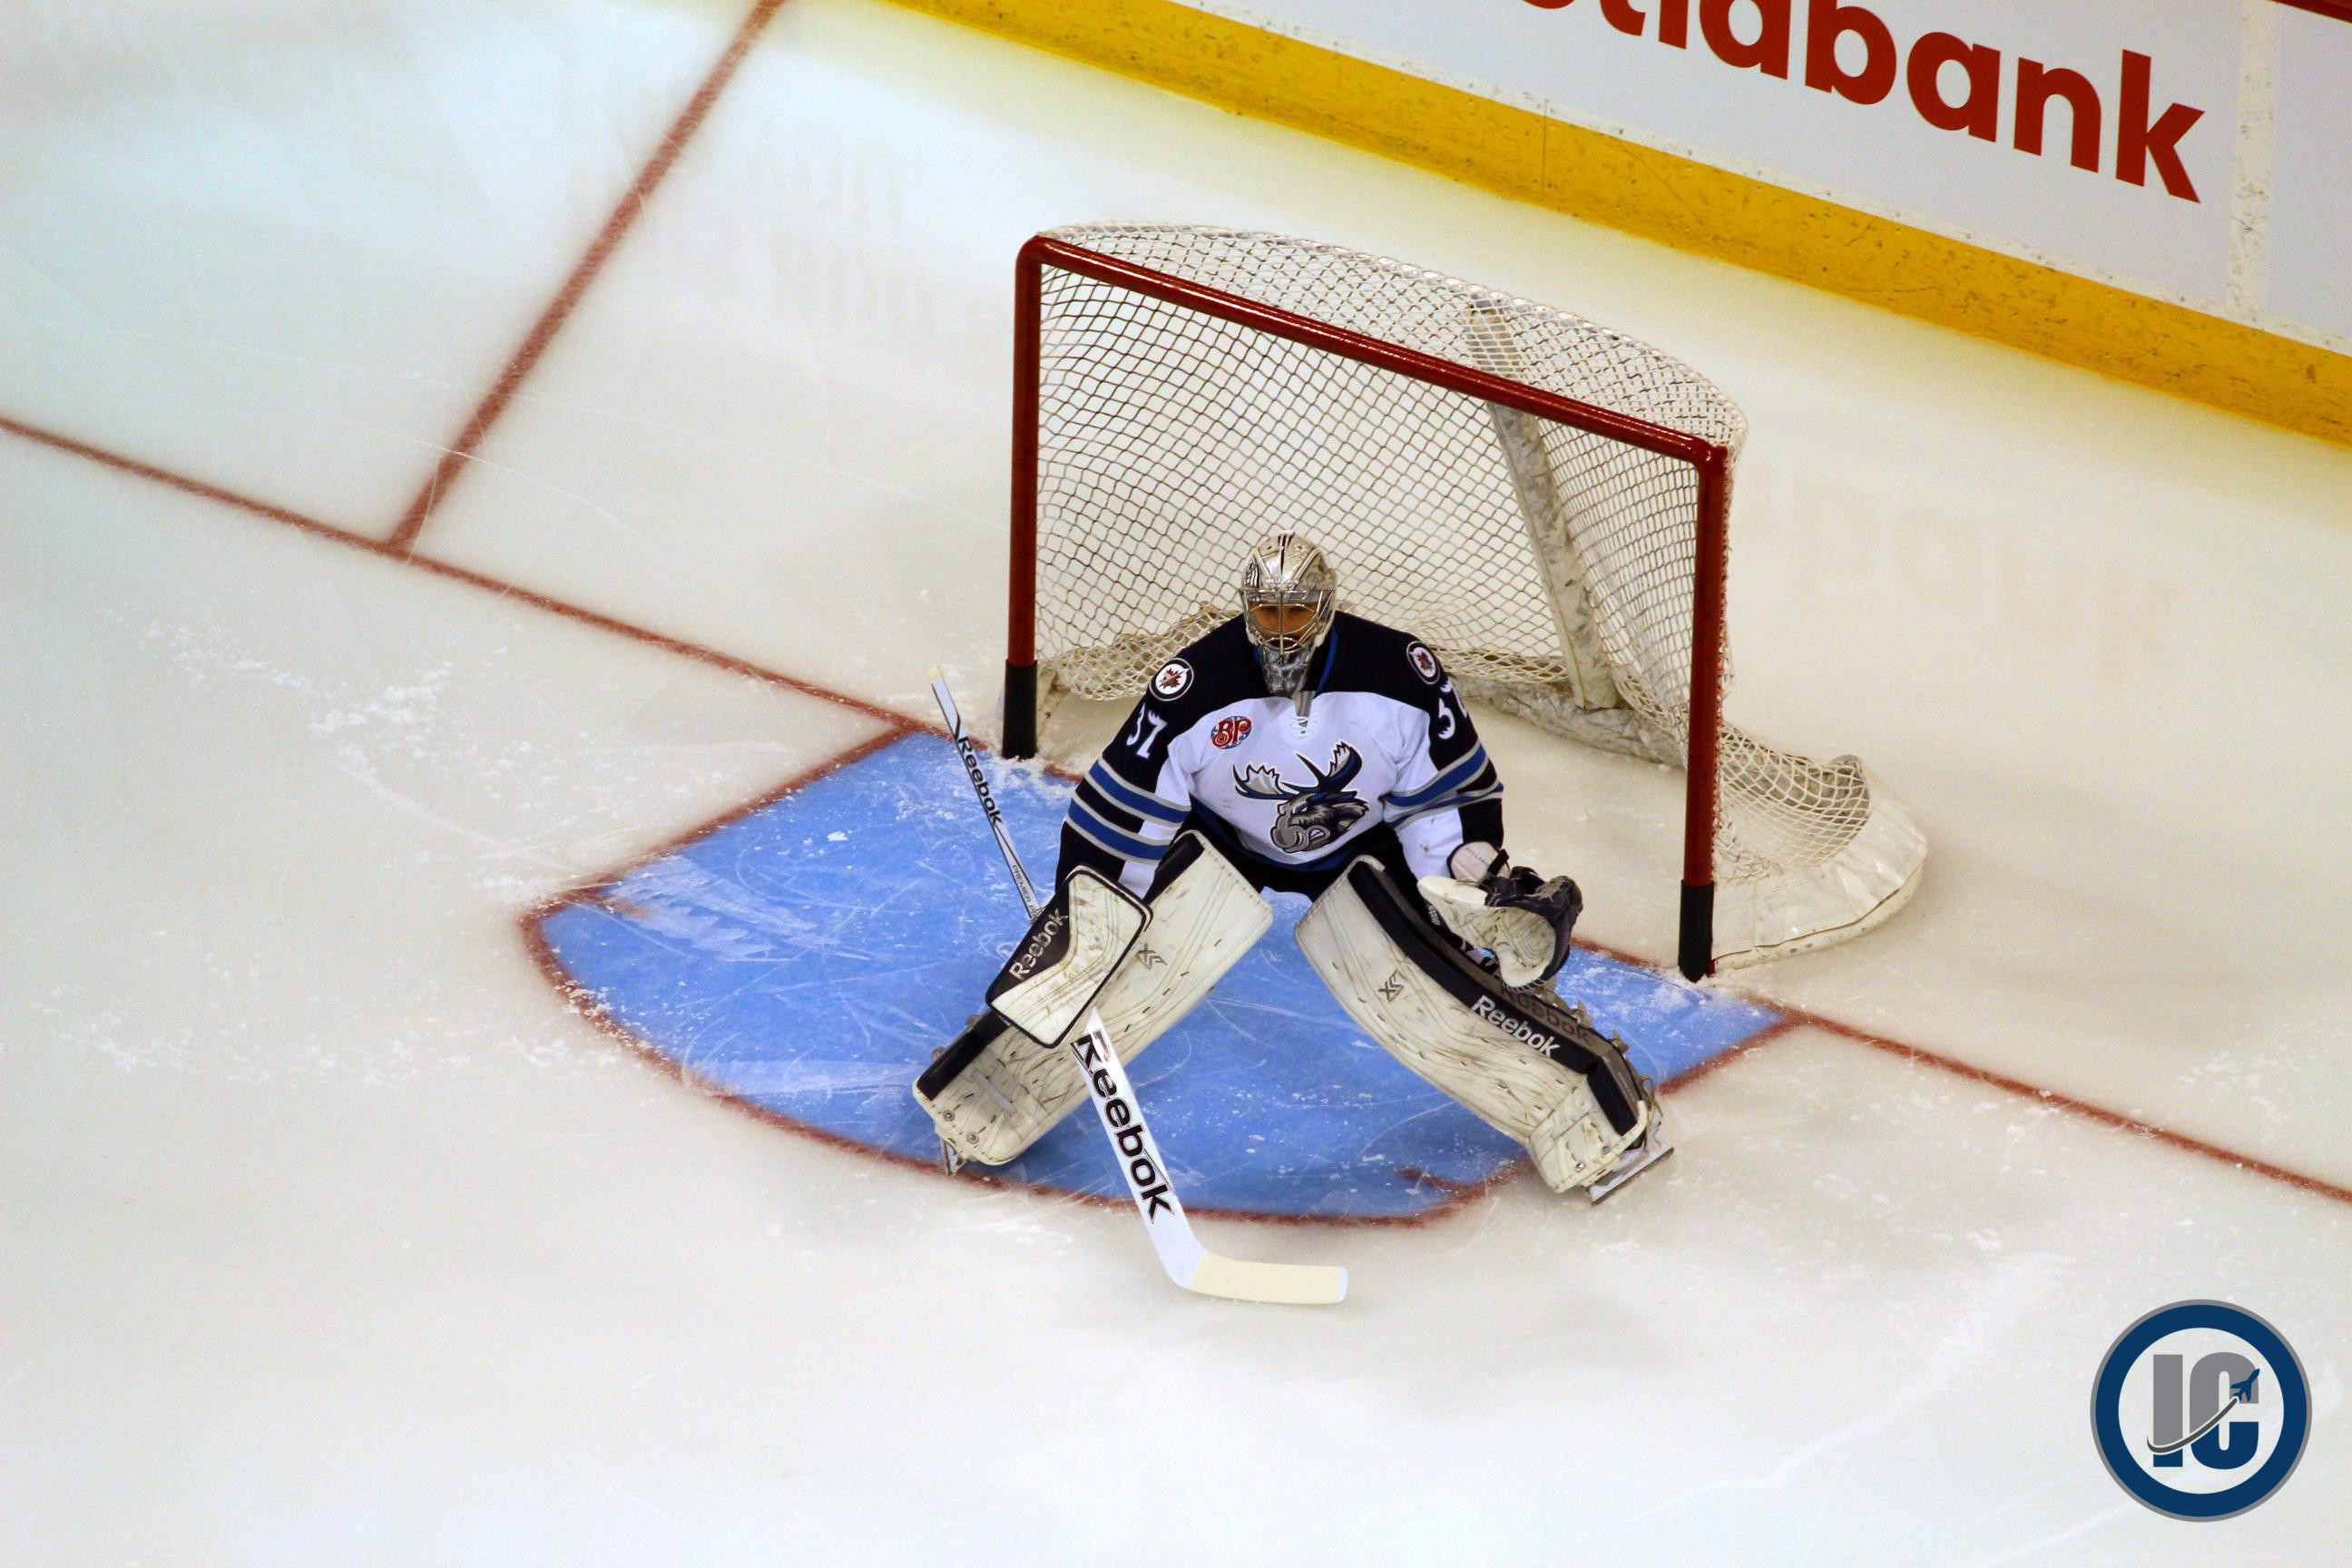 Connor Hellebuyck in warm up